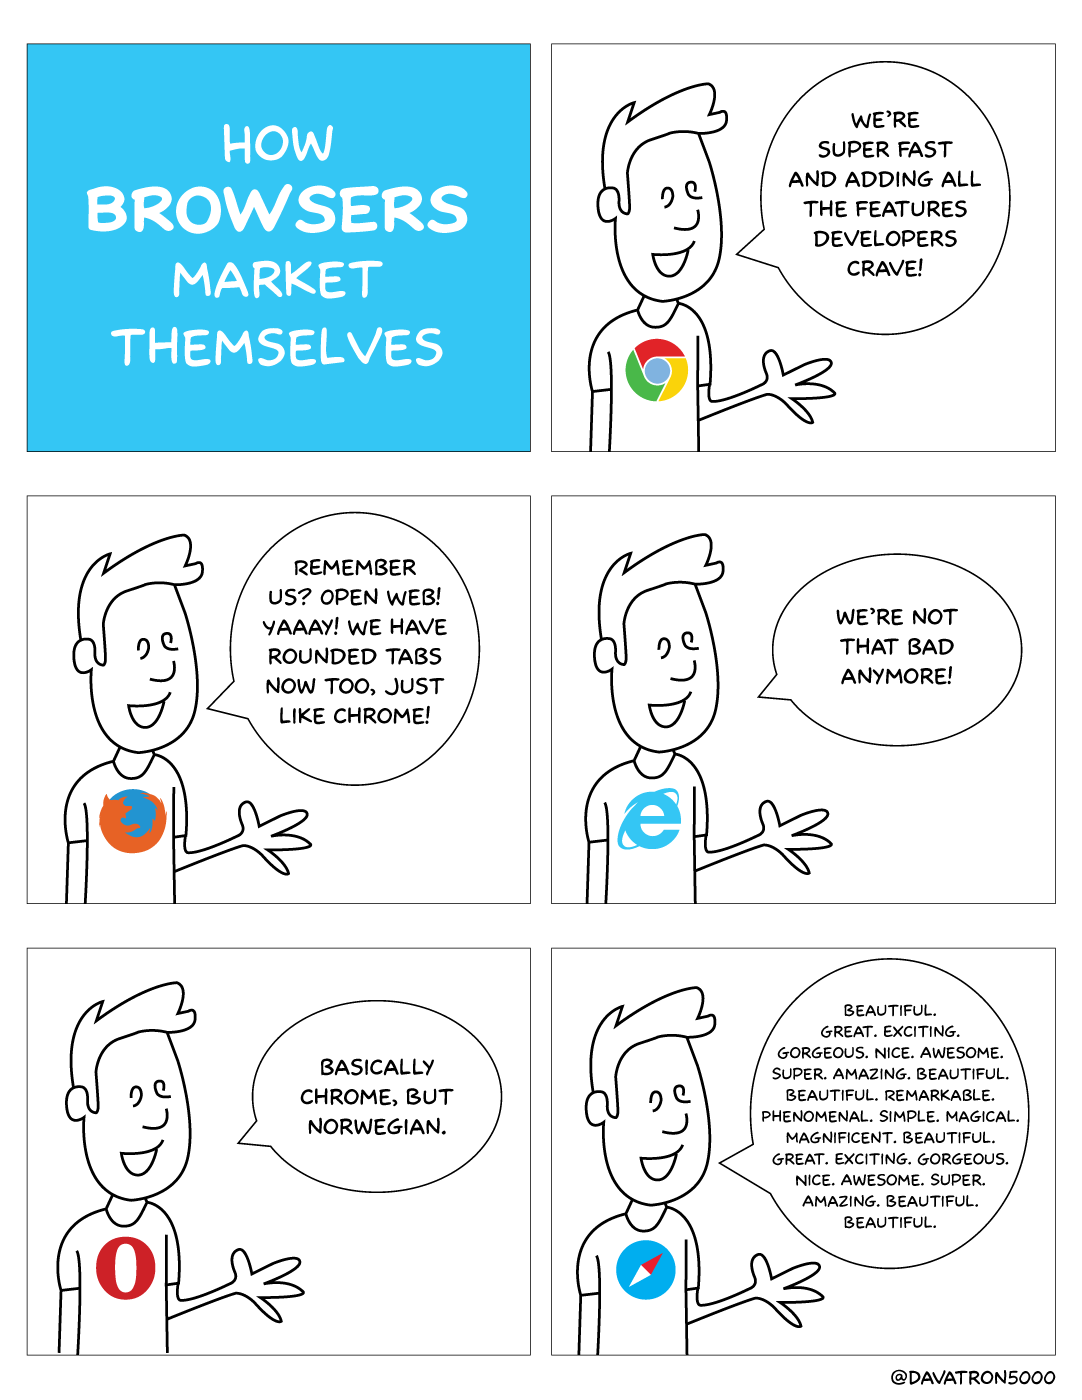 Comic about how web browsers market themselves